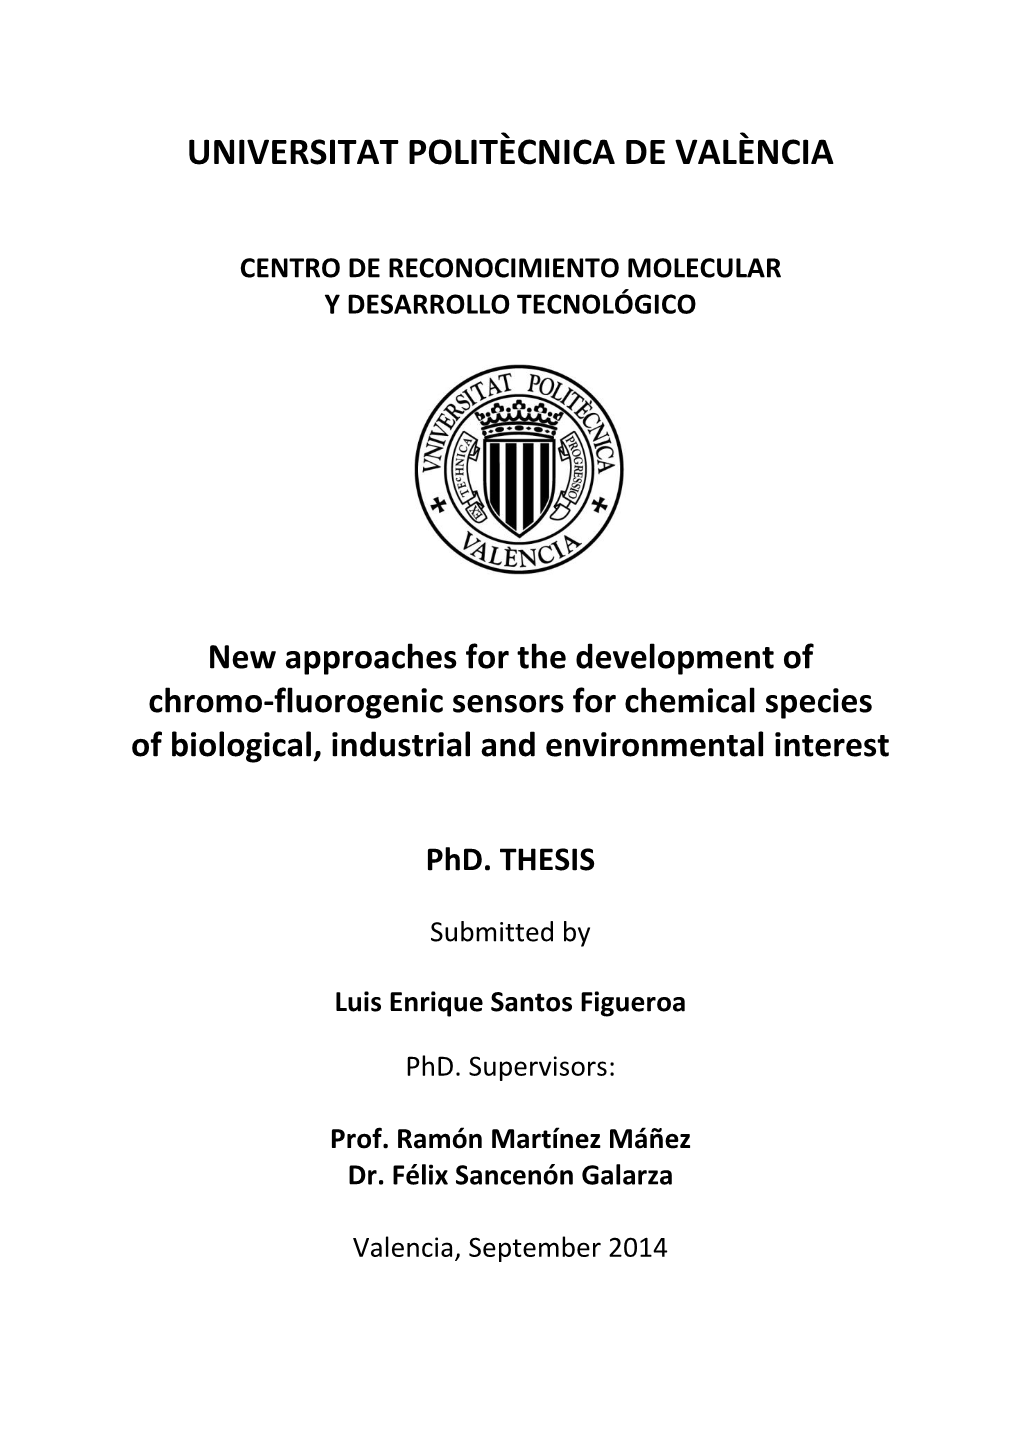 New Approaches for the Development of Chromo-Fluorogenic Sensors for Chemical Species of Biological, Industrial and Environmental Interest